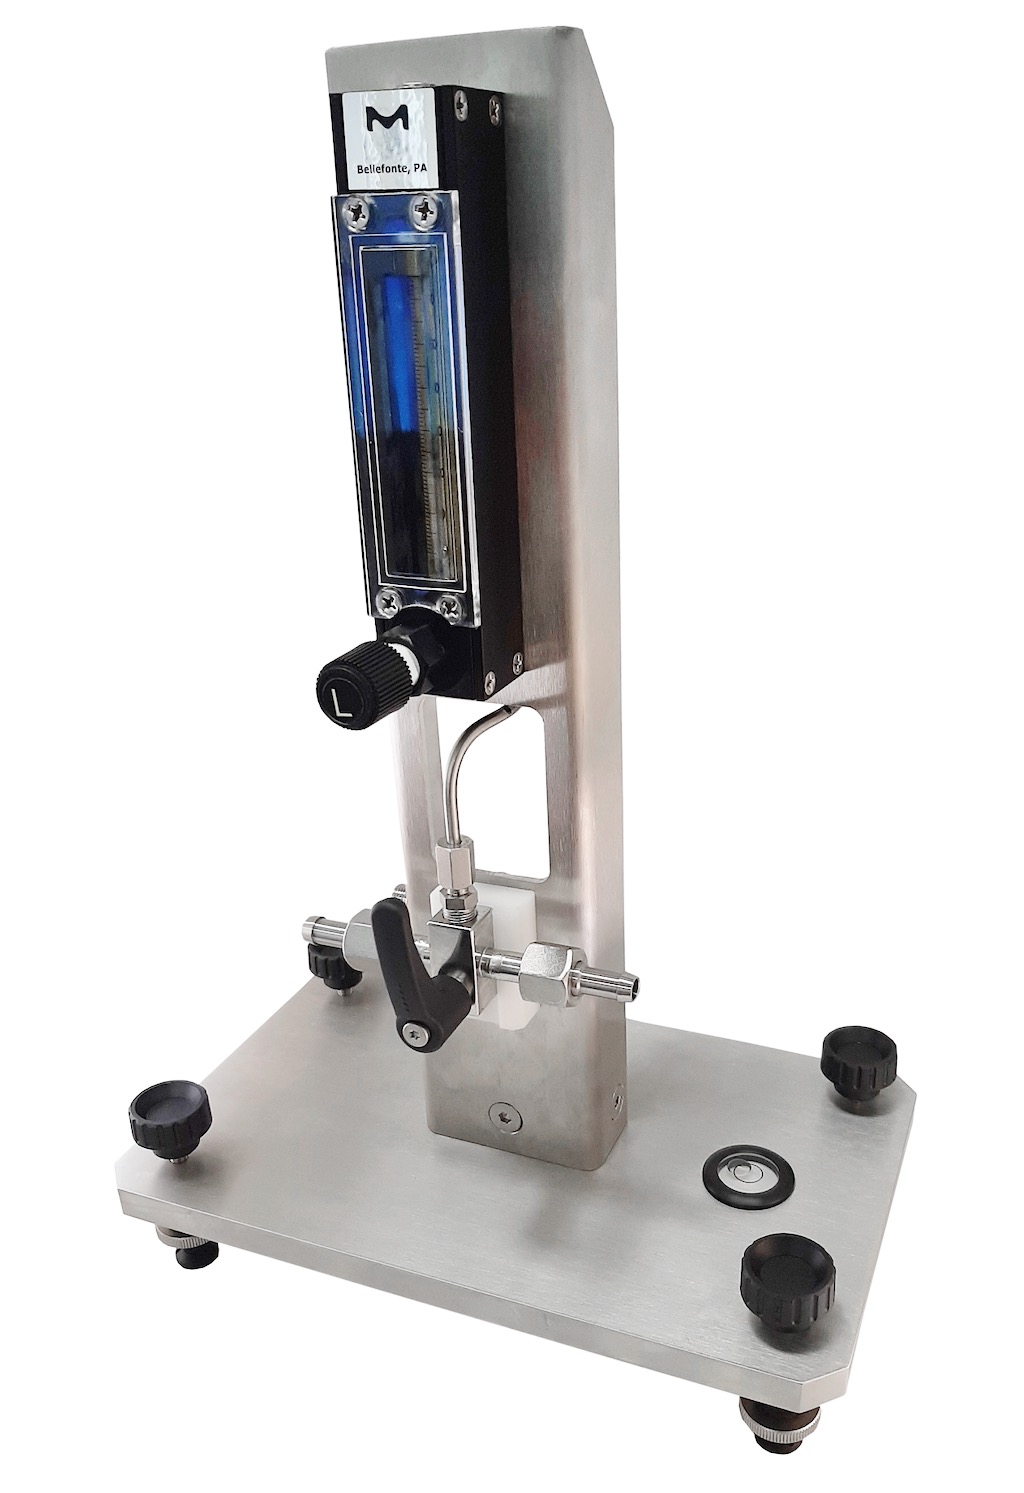 Nitrogen injection device for laboratory product development.